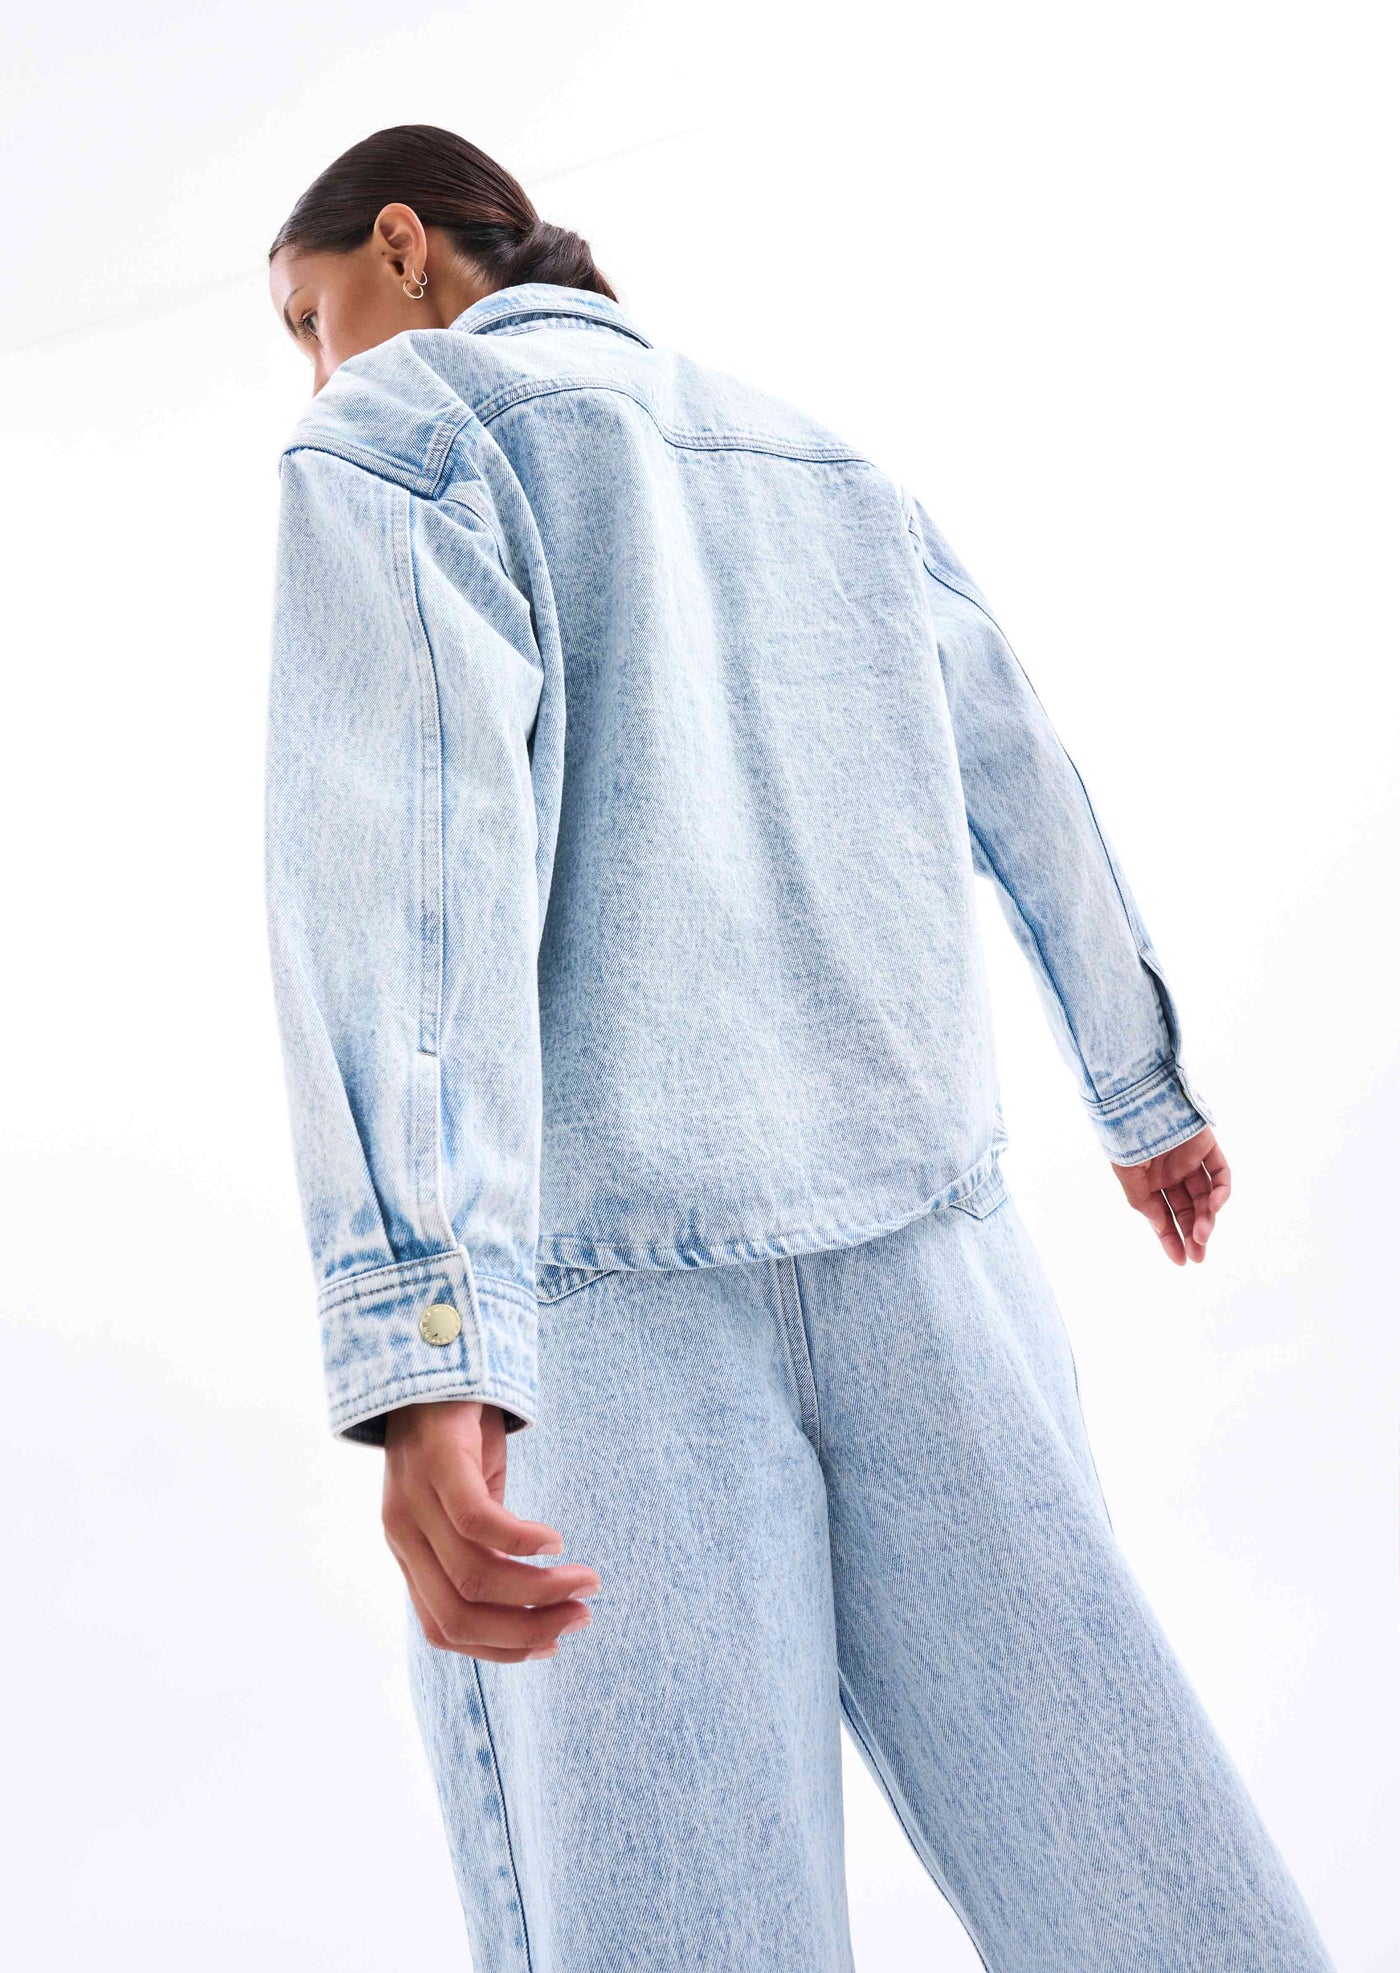 FIELD HOUSE SHIRT IN LIGHT WASHED DENIM